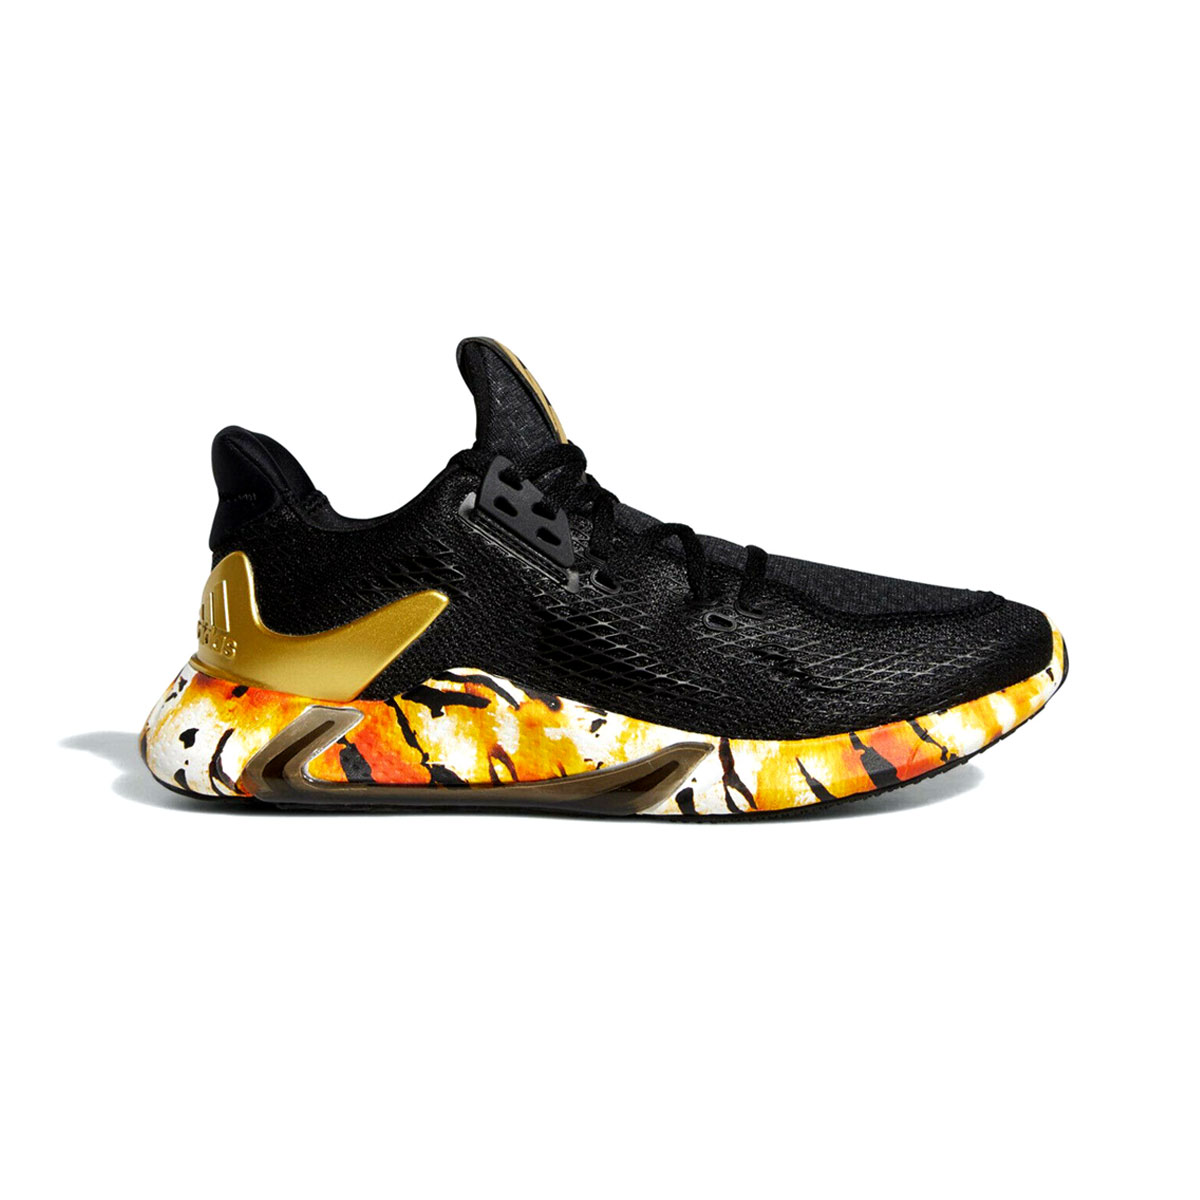 FW4535 Multi-Colored Running Shoes 